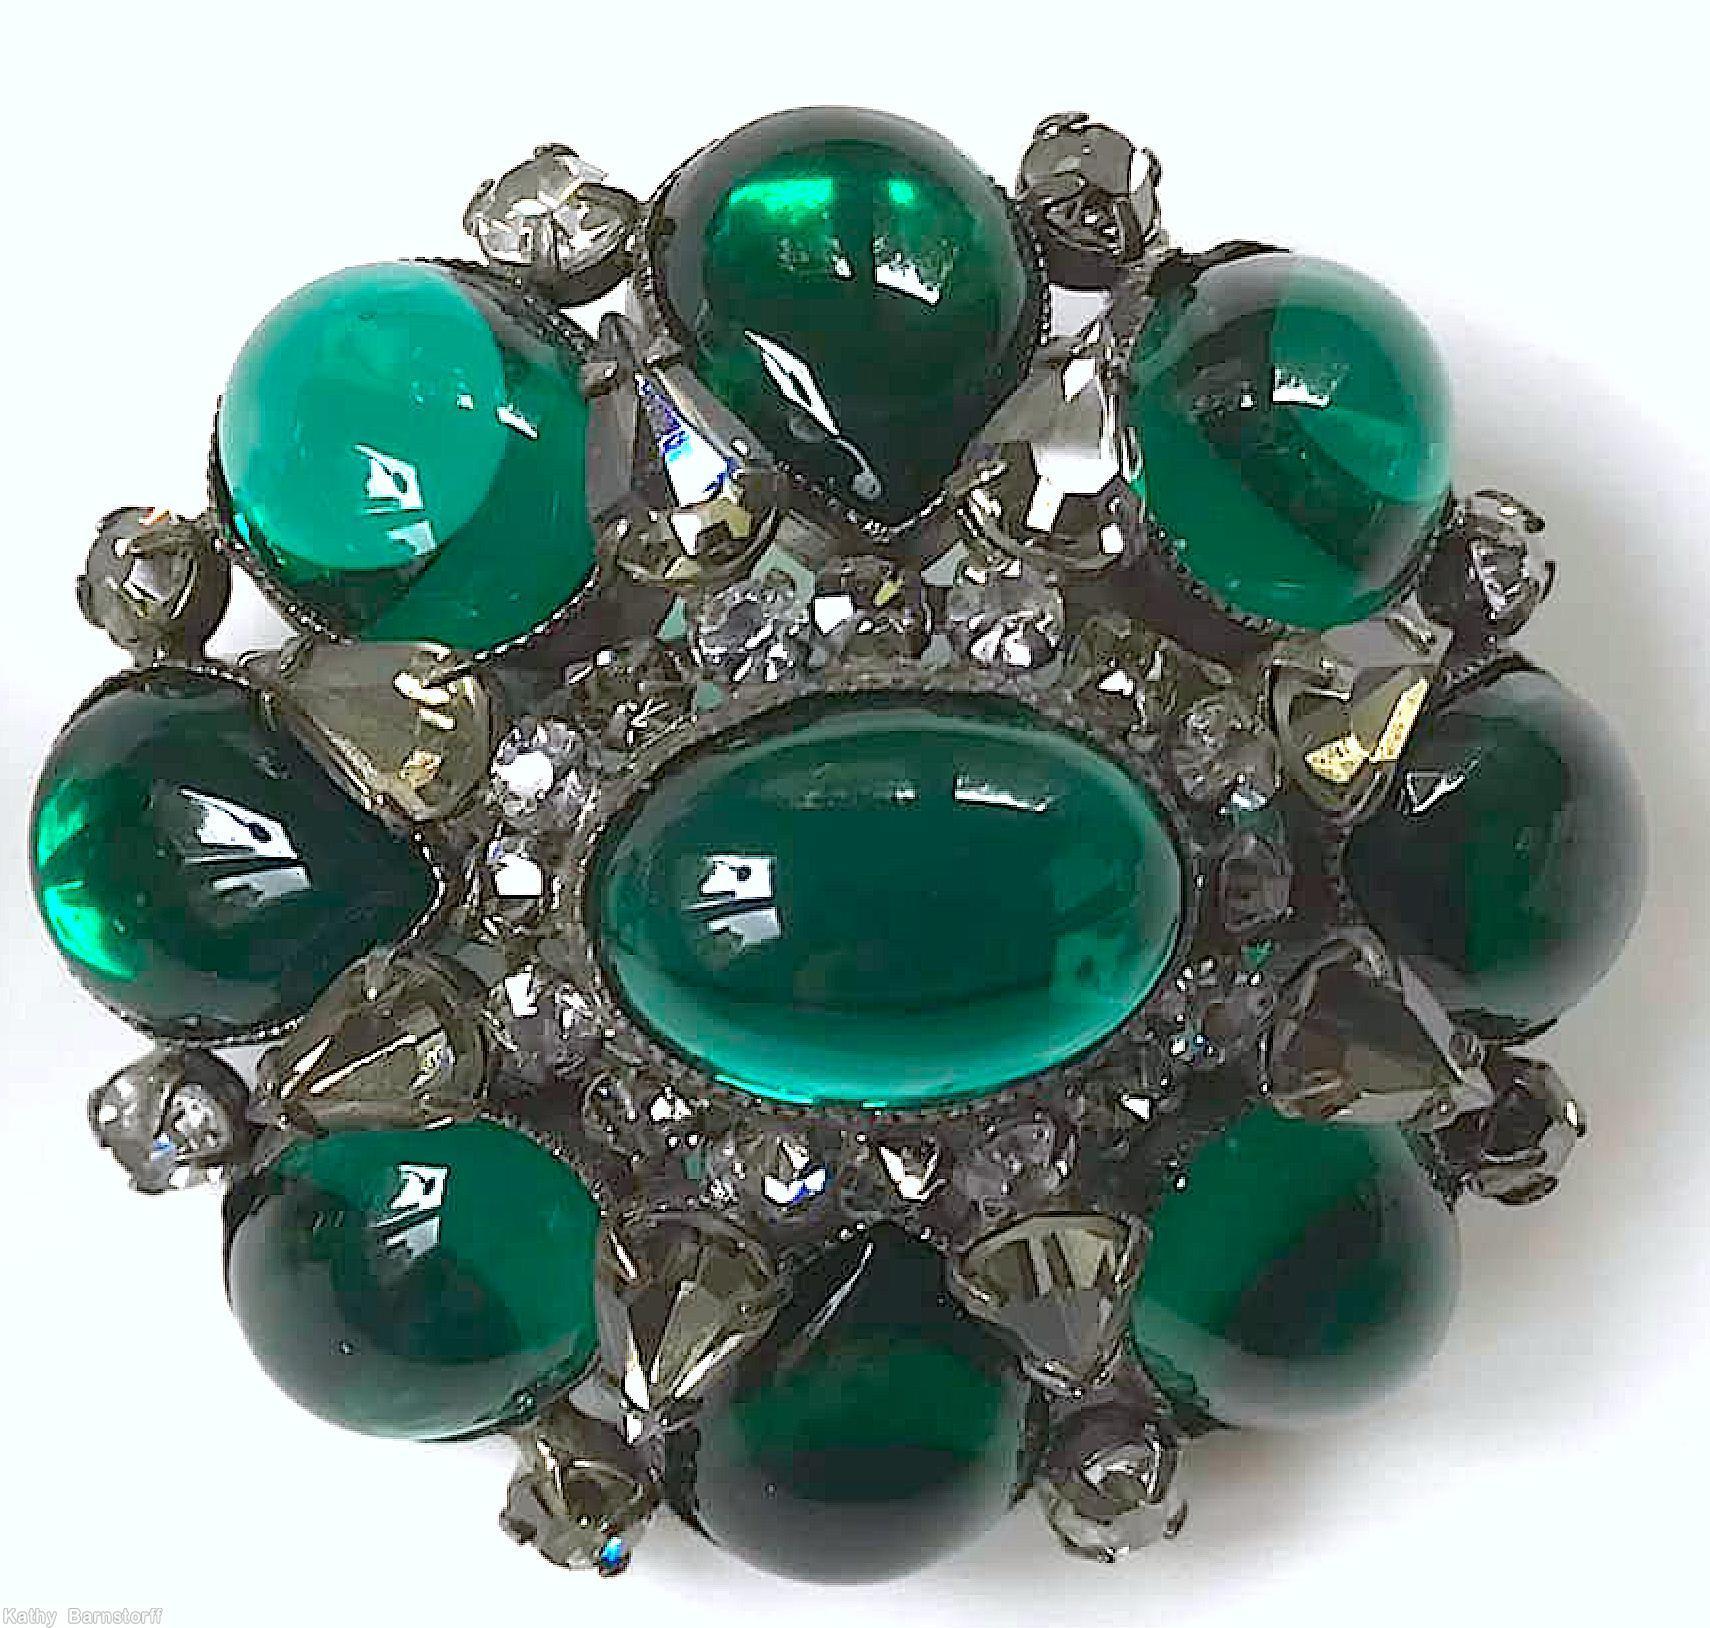 Schreiner bezel setting domed oval radial pin 4 large oval cab 4 large teardrop 8 small teardrop large oval center emerald large oval cab clear champagne small teardrop crystal small chaton silvertone jewelry